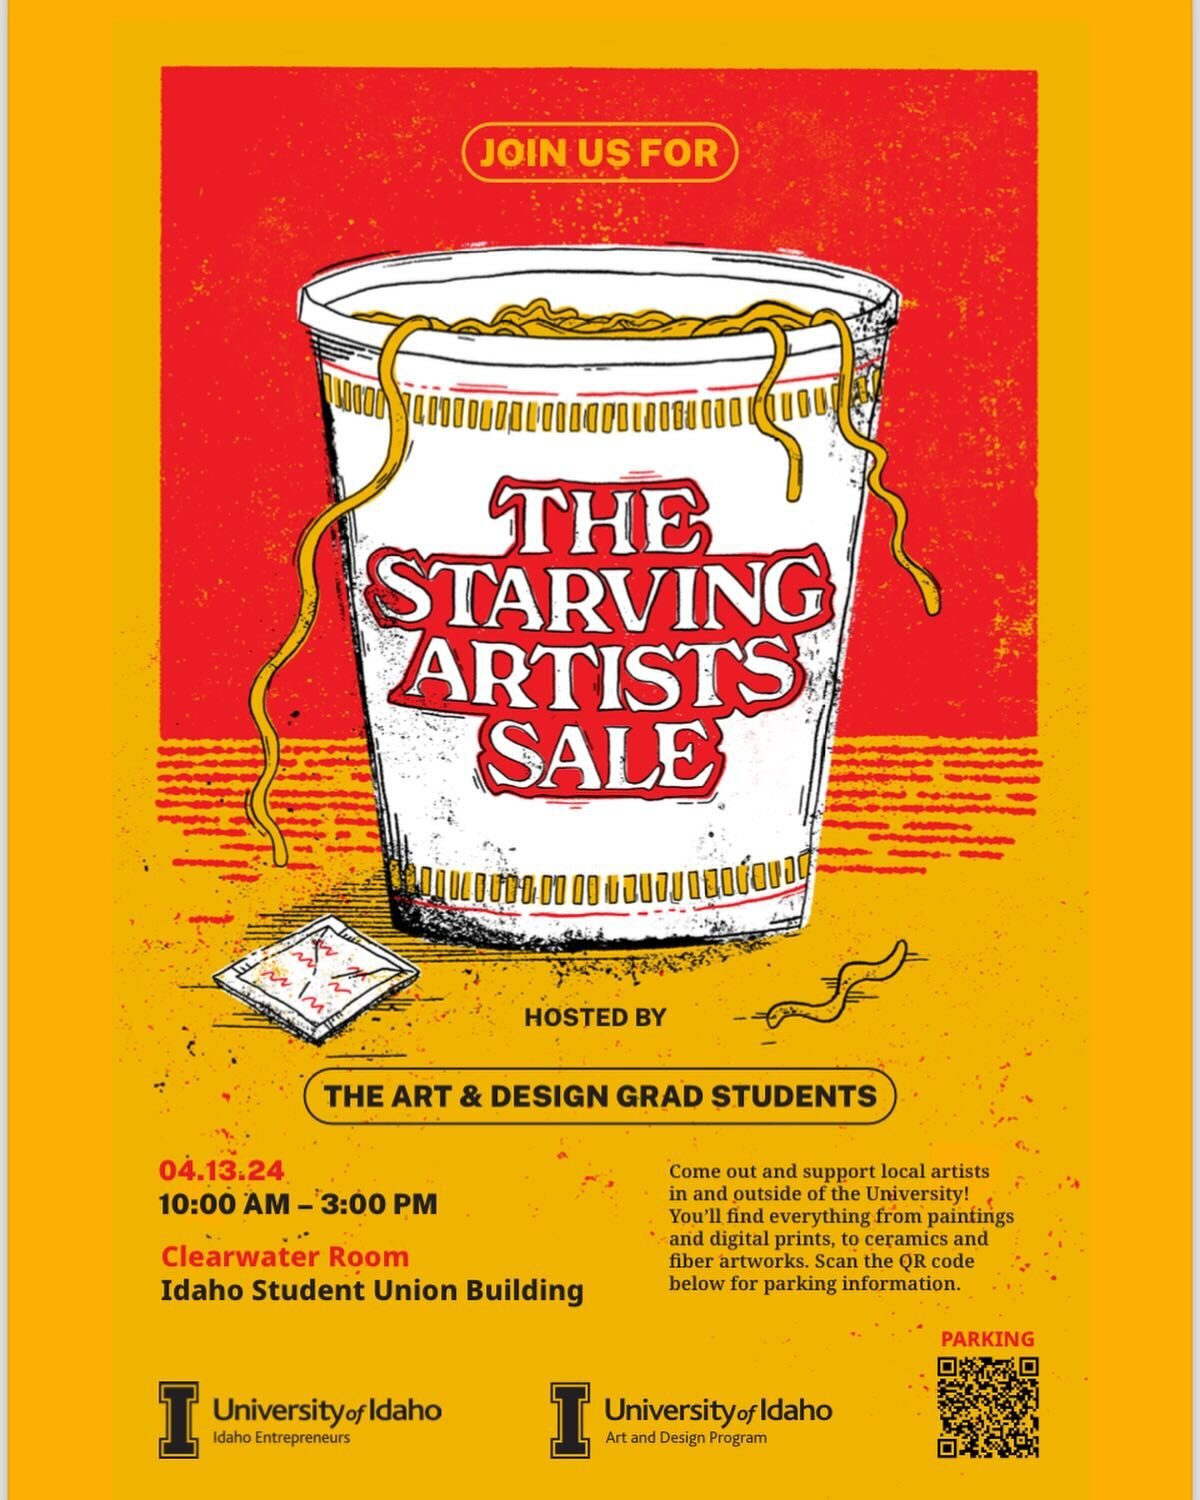 Starving Artist Sale at University of Idaho- April 13, 10-3.
Clearwater Room in the SUB (formerly the Commons). Check it out and buy some stuff. Please share this post if you can.  #uidaho #artsale #studentart #artstudents #starvingartist #supportloc